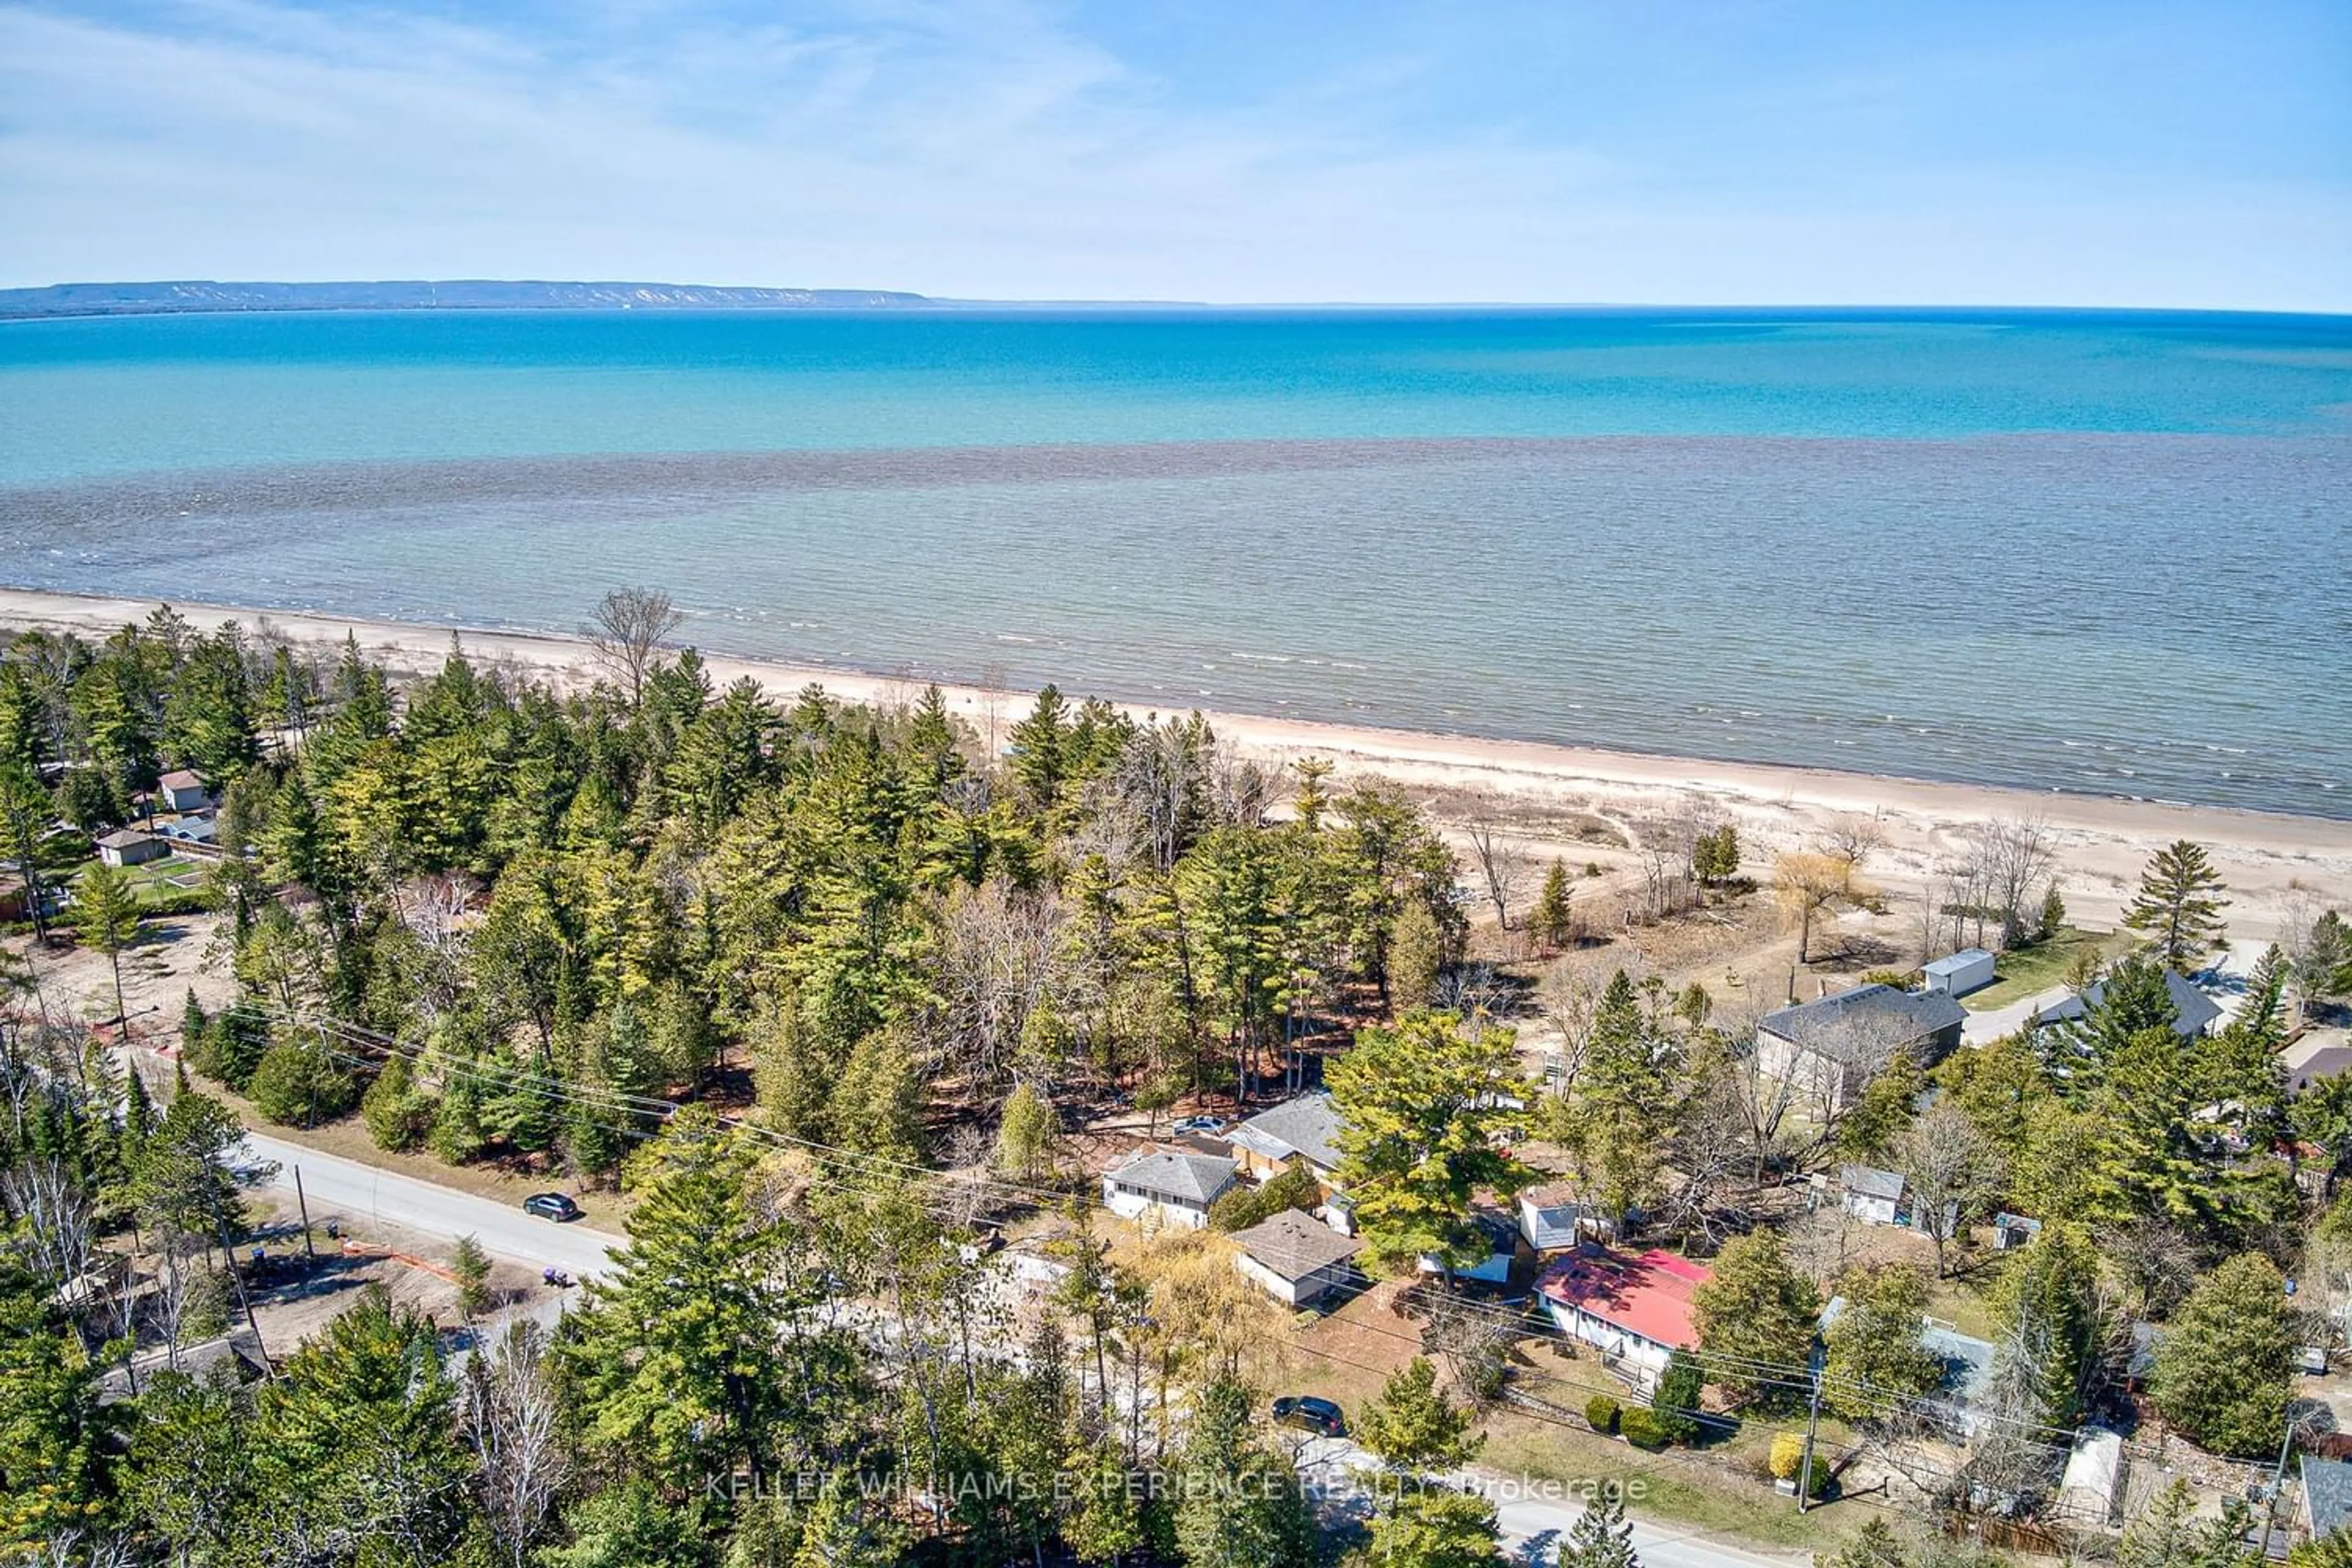 Lakeview for 56 Homewood Ave, Wasaga Beach Ontario L9Z 2M2